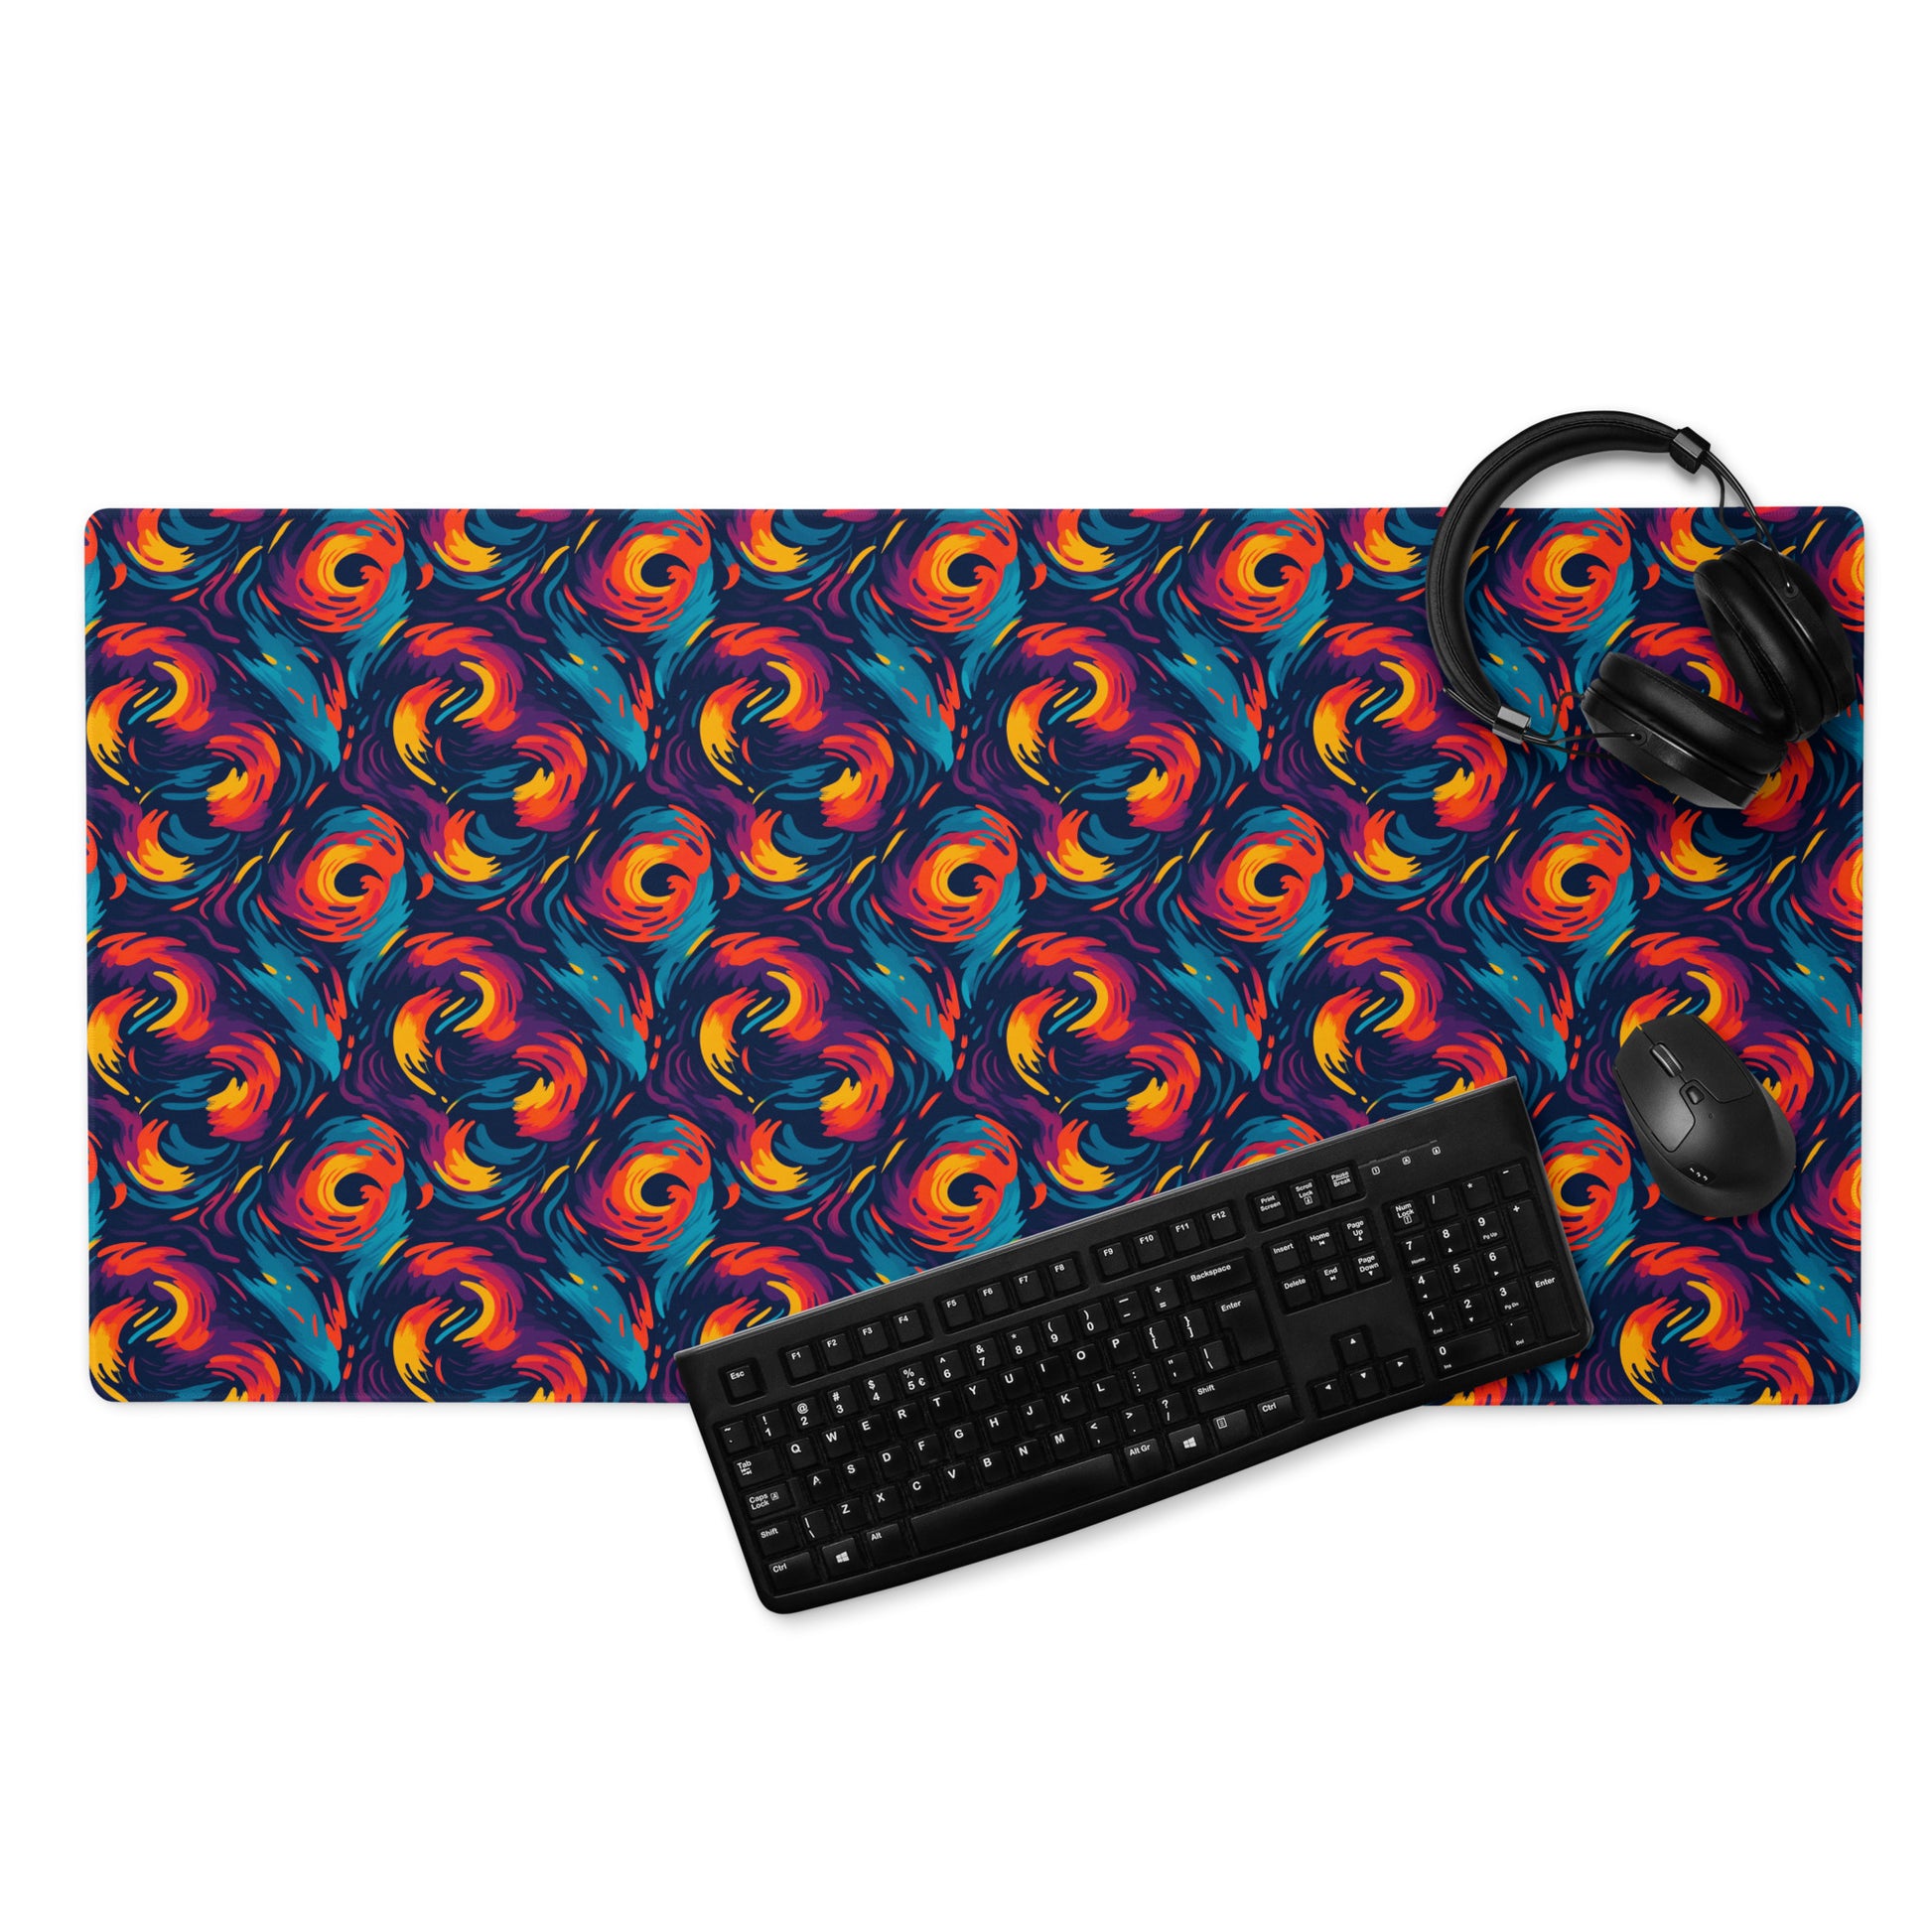 A 36" x 18" desk pad with fiery swirls on it displayed with a keyboard, headphones and a mouse. Red and Blue in color.